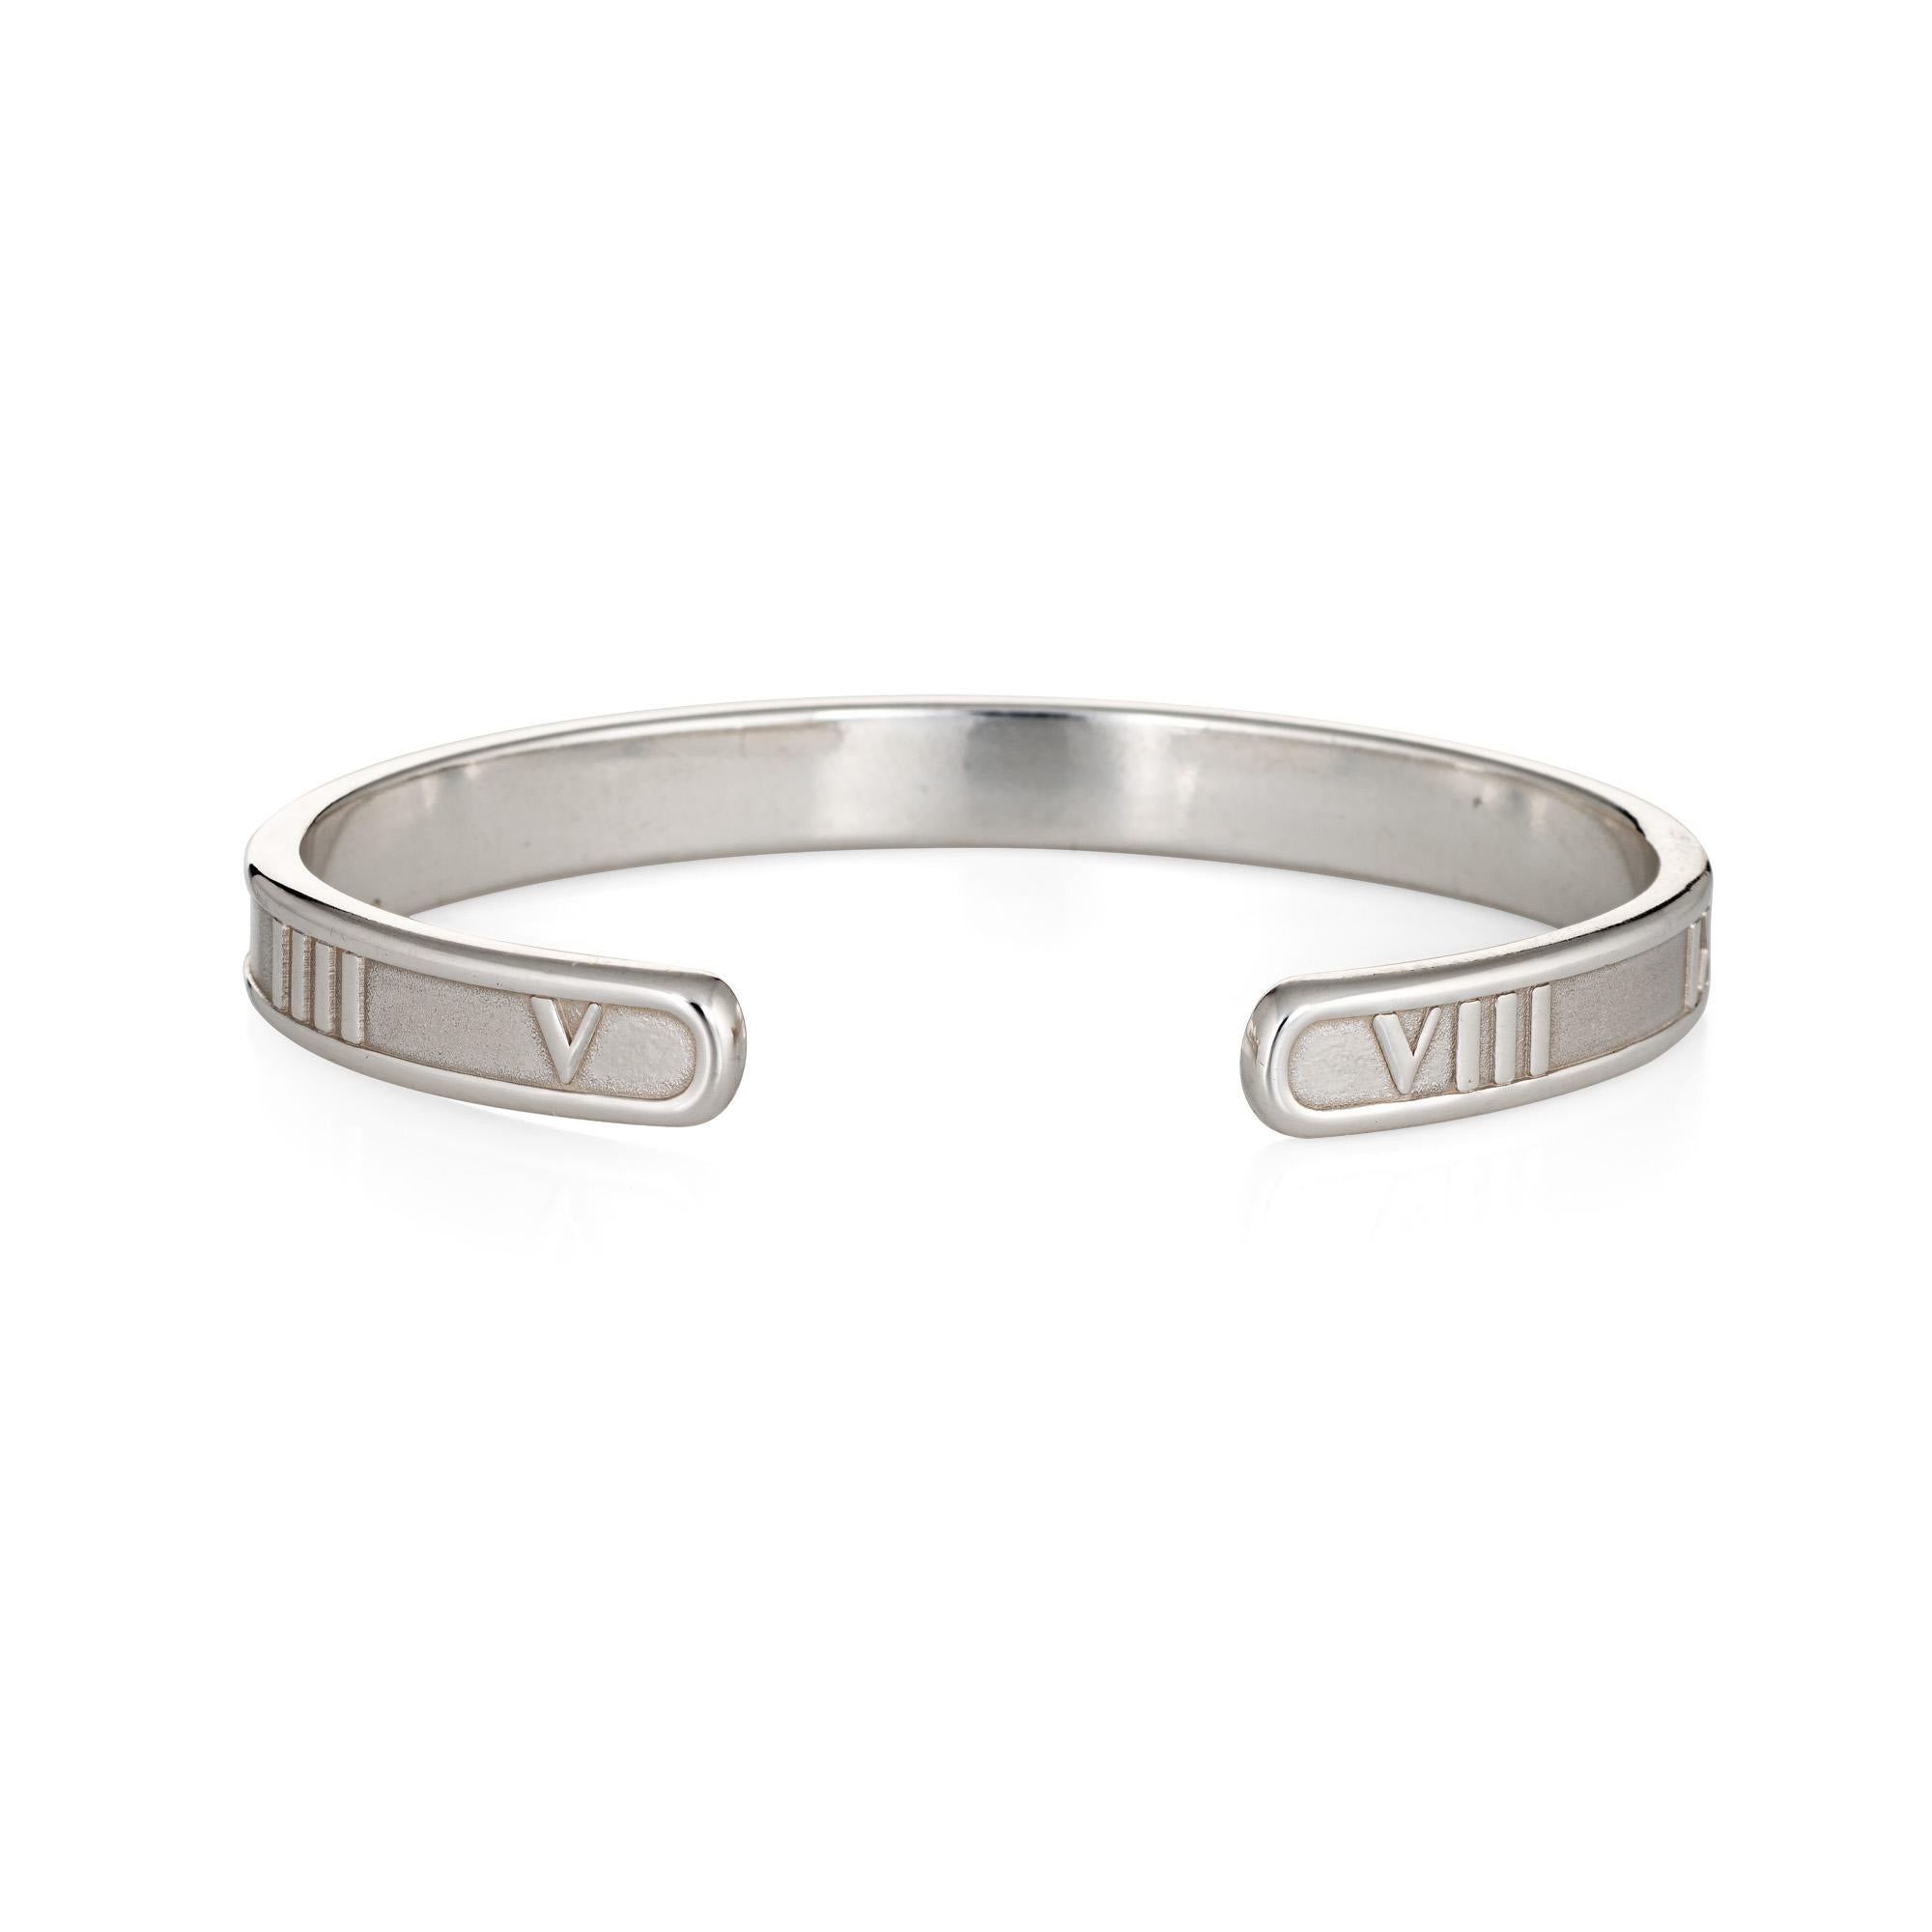 Stylish and finely detailed vintage Tiffany & Co Atlas cuff bracelet crafted in sterling silver.  

The cuff bracelet features Roman Numerals. The bracelet is great worn alone or layered with your fine jewelry from any era.  

The bracelet is in